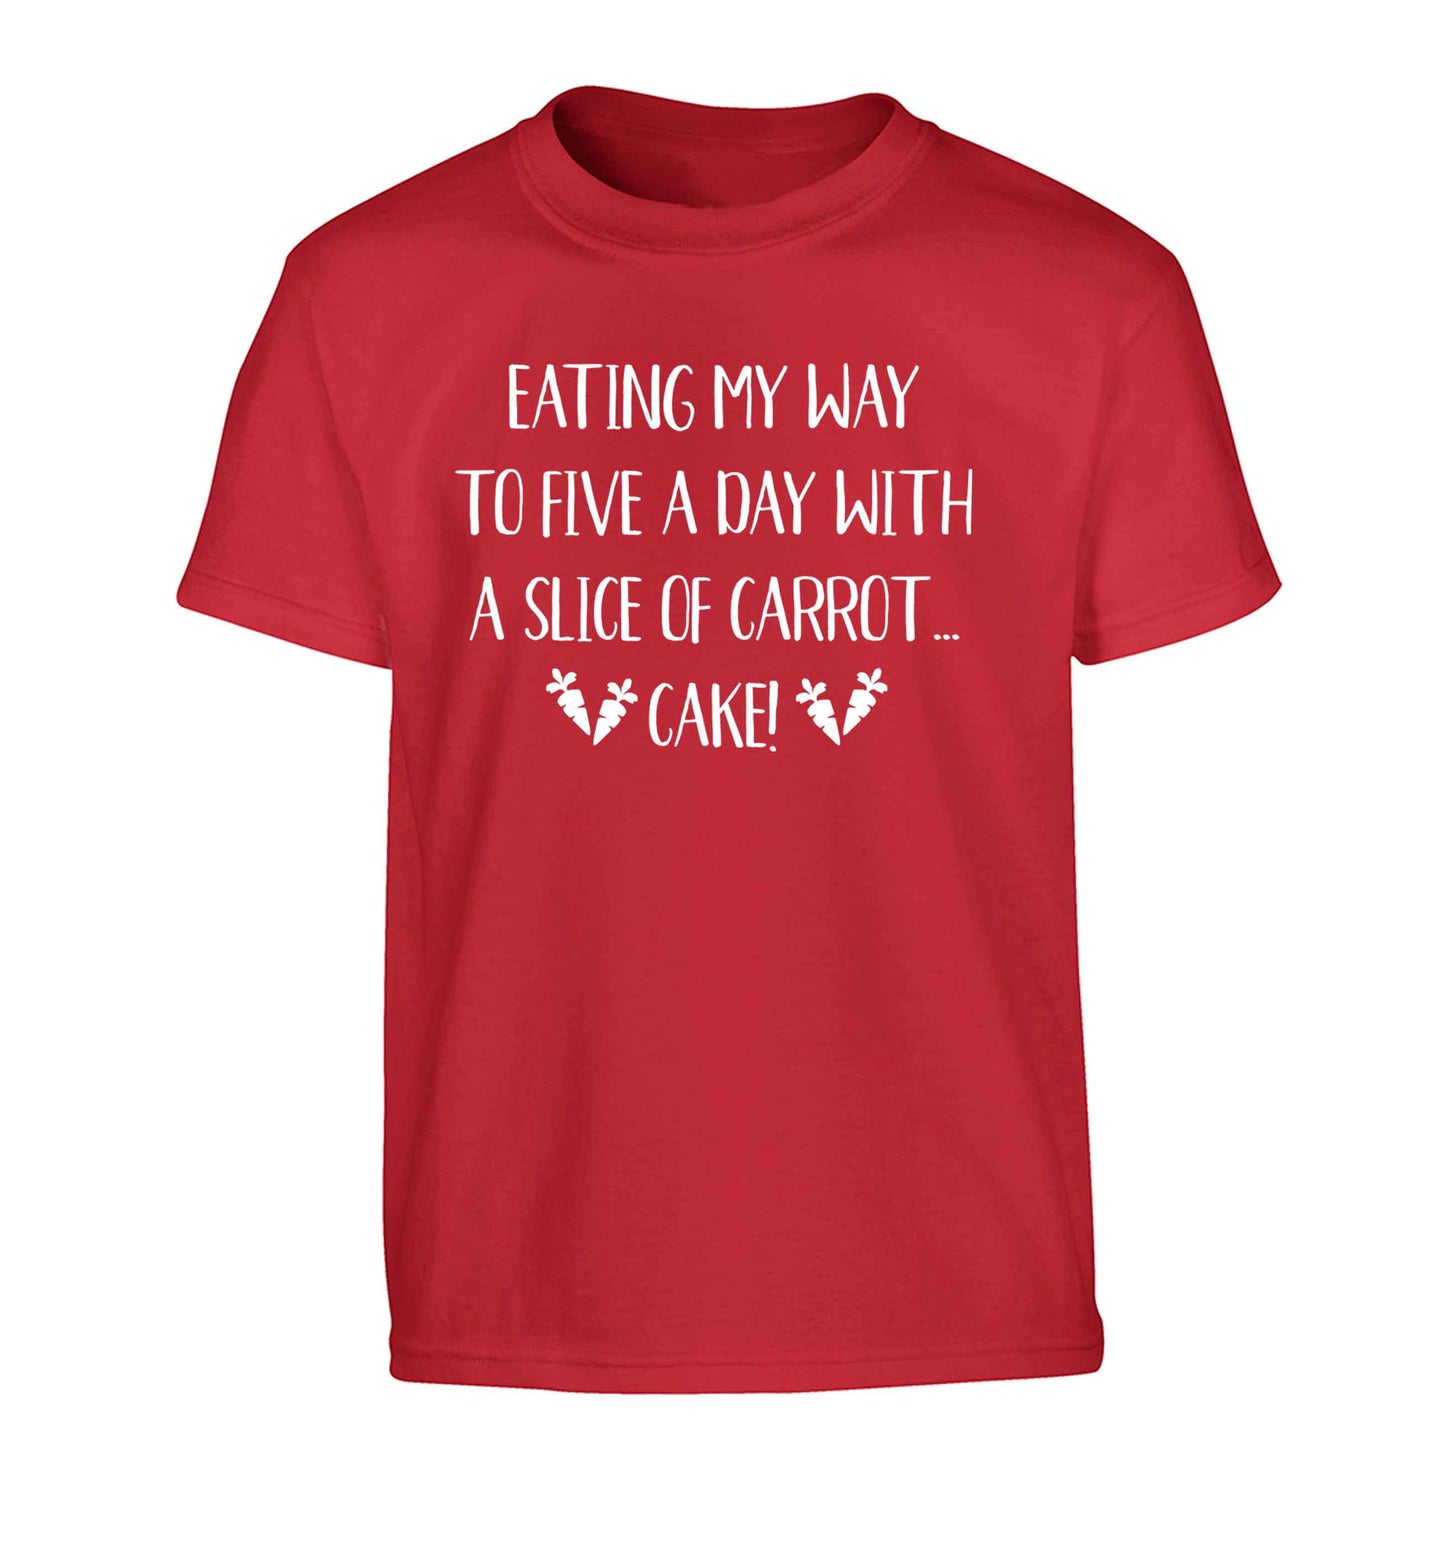 Eating my way to five a day with a slice of carrot cake day Children's red Tshirt 12-13 Years